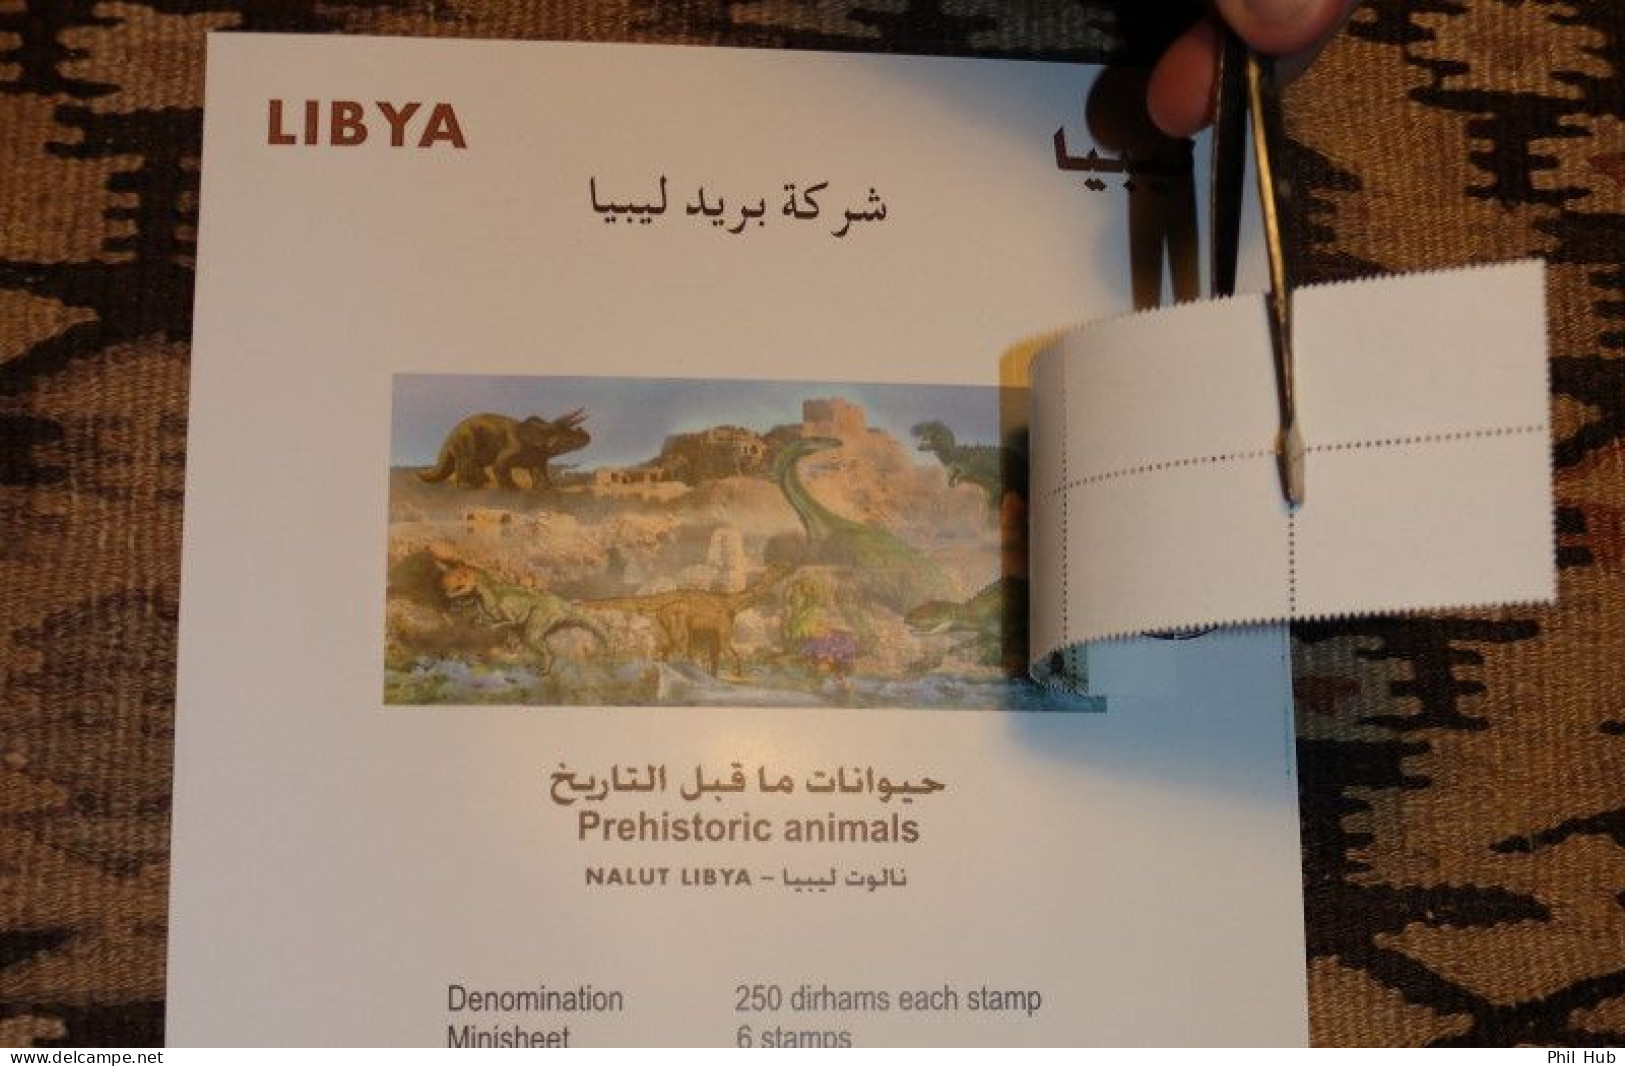 LIBYA 2013 Dinosaurs (Libya Post INFO-SHEET With Stamps PMK + Artist's Signature) SUPPLIED UNFOLDED - Préhistoriques